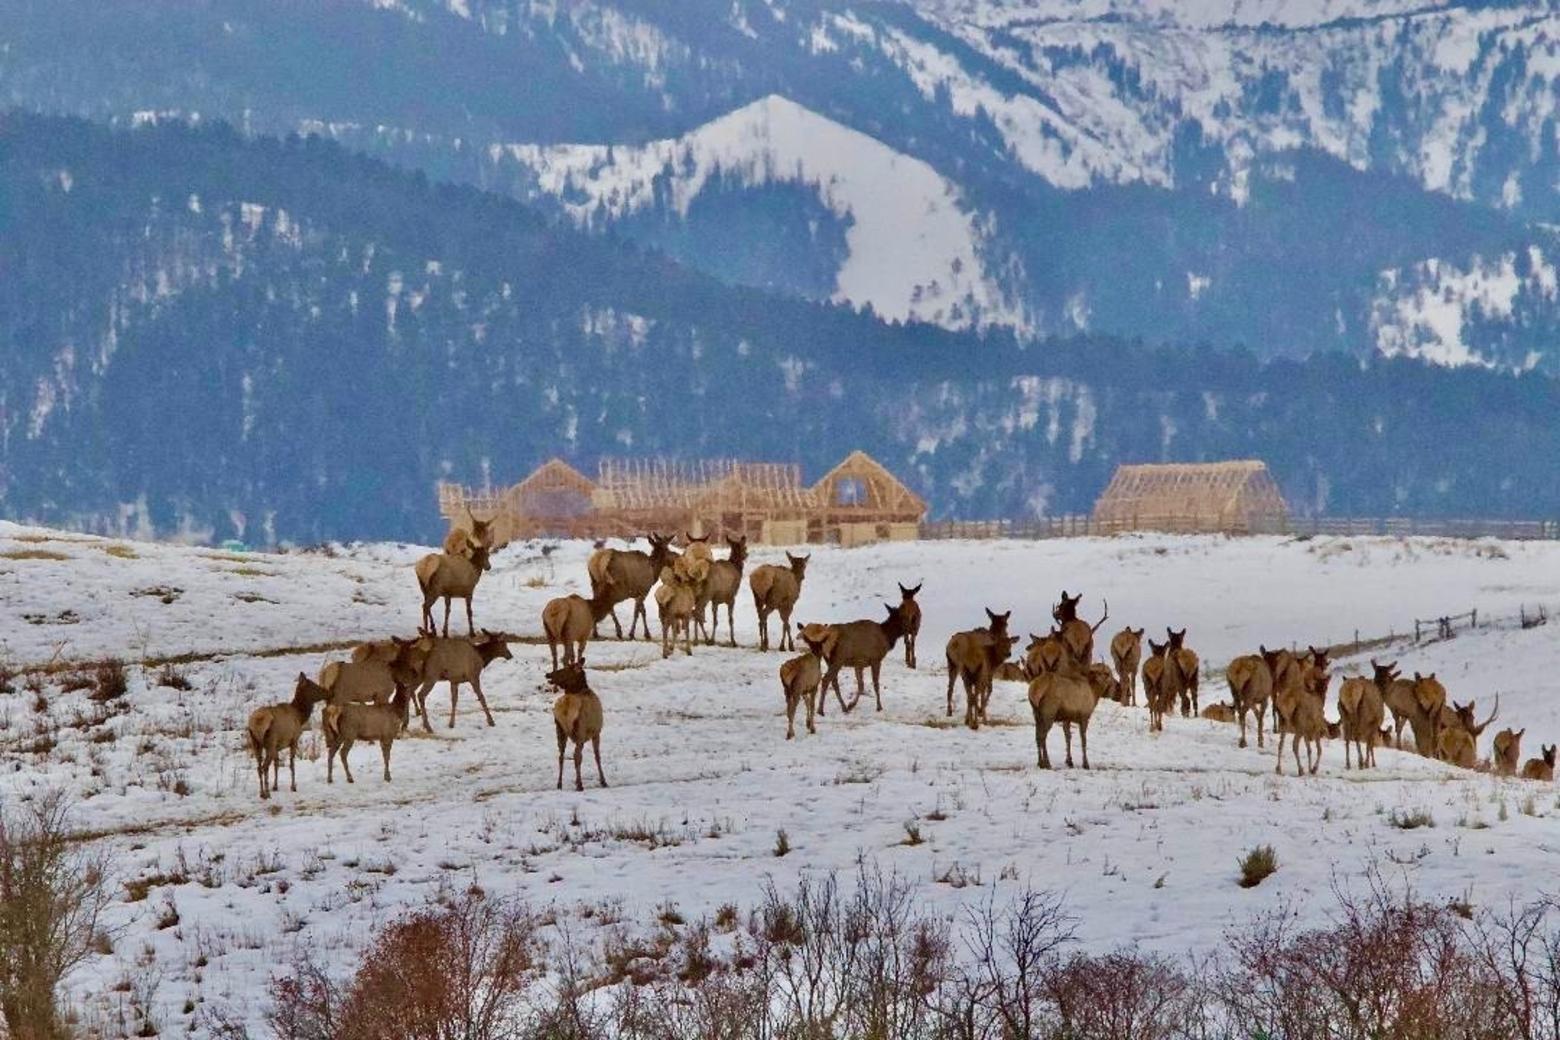 When people build their dream homes in wildlife winter range, what do they think will happen next? The problem is we humans don't often reflect on cause and effect, and that's why the wild West is eroding. Photo courtesy Holly Pippel